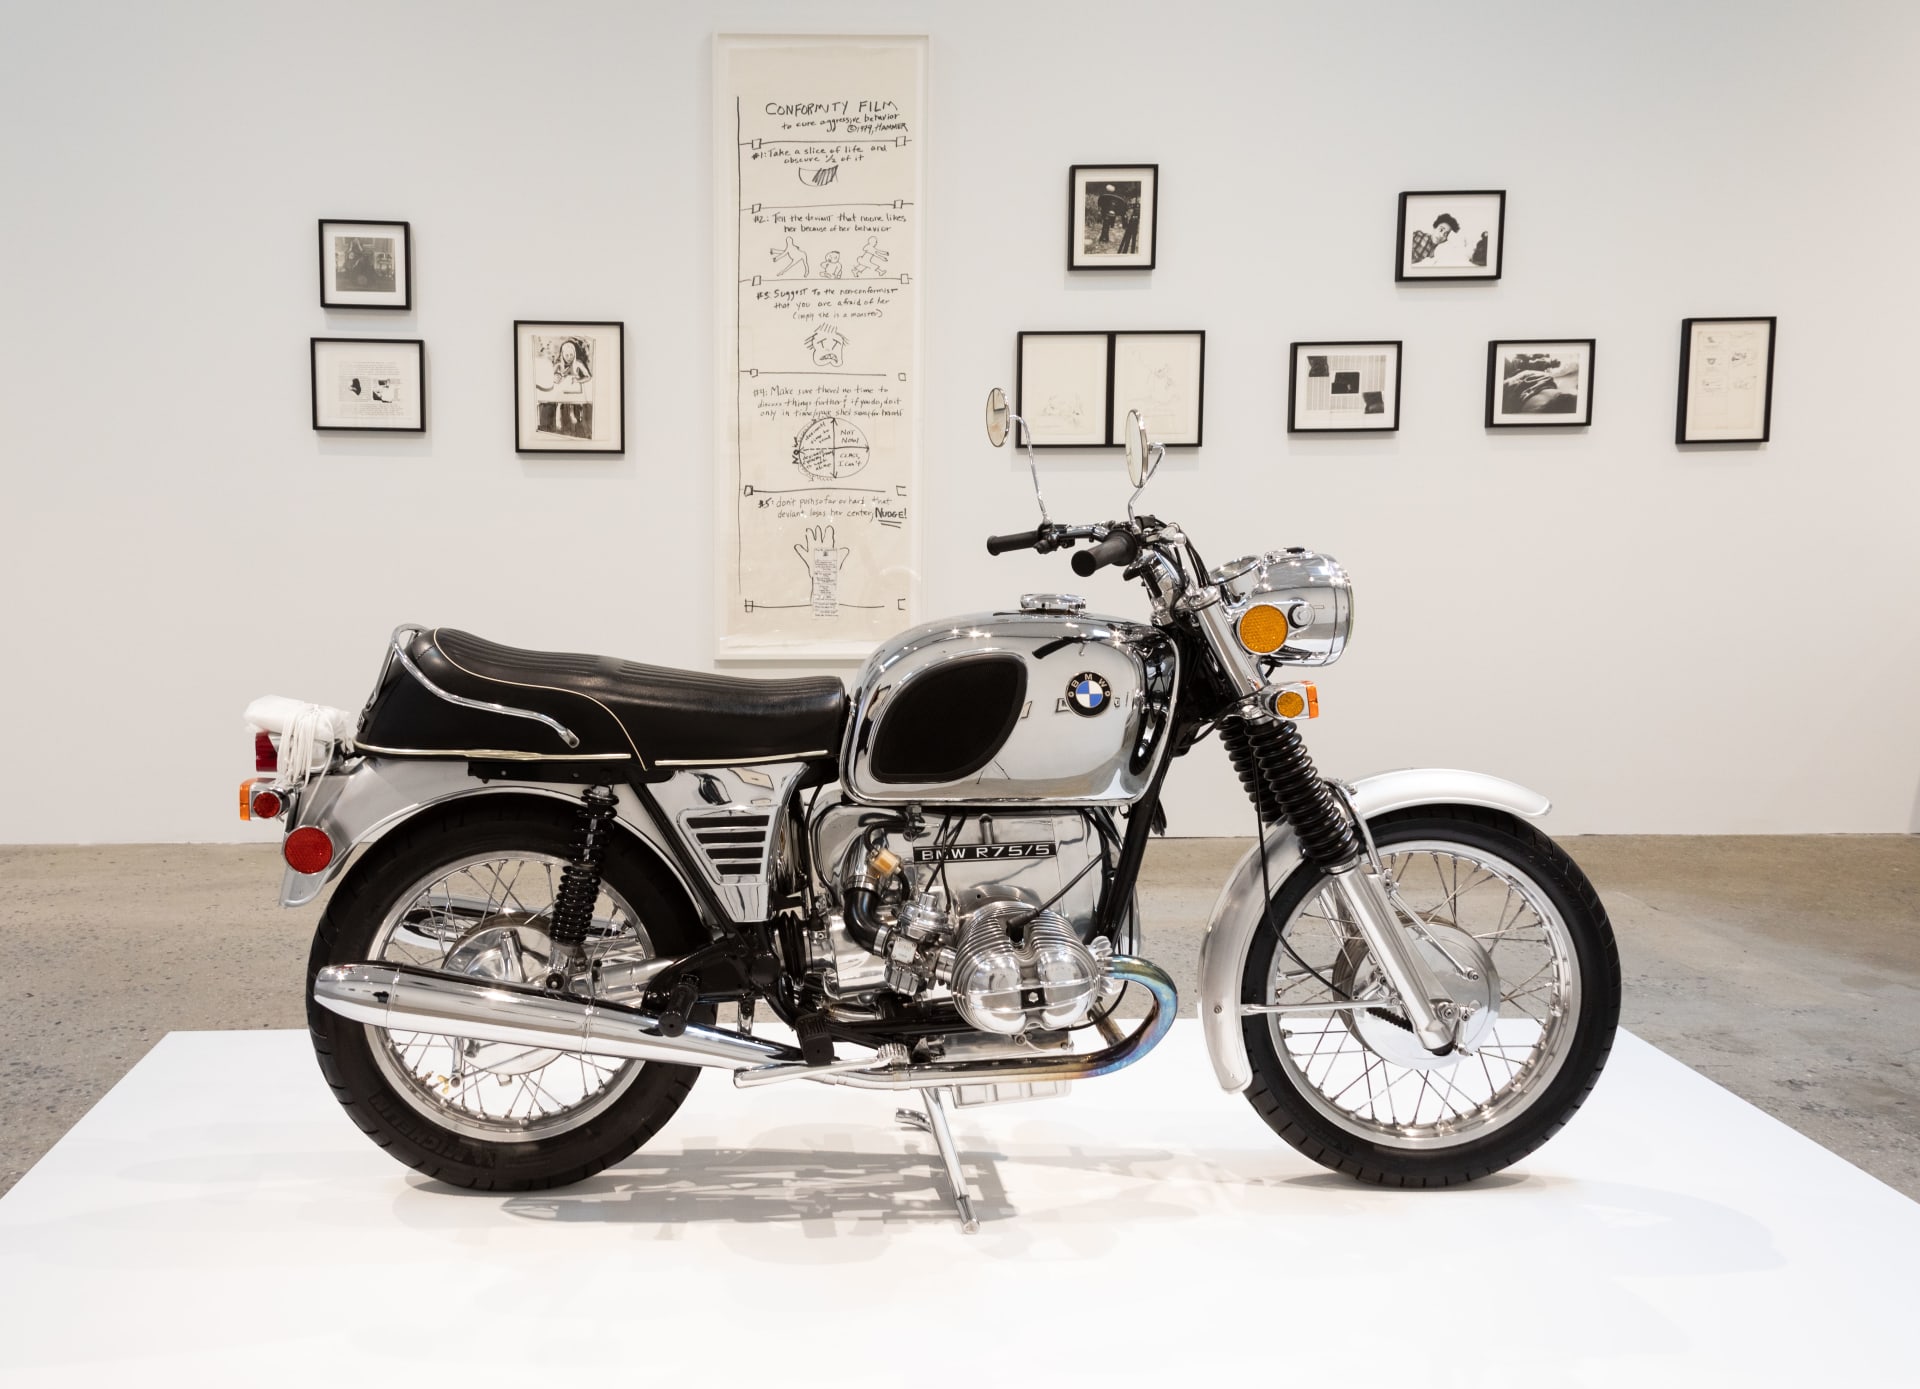 A vintage BMW motorcycle in impeccable condition sits on a white platform in the middle of a contemporary art gallery. Behind it, hanging on the wall, are a number of framed drawings, images, and journal pages.